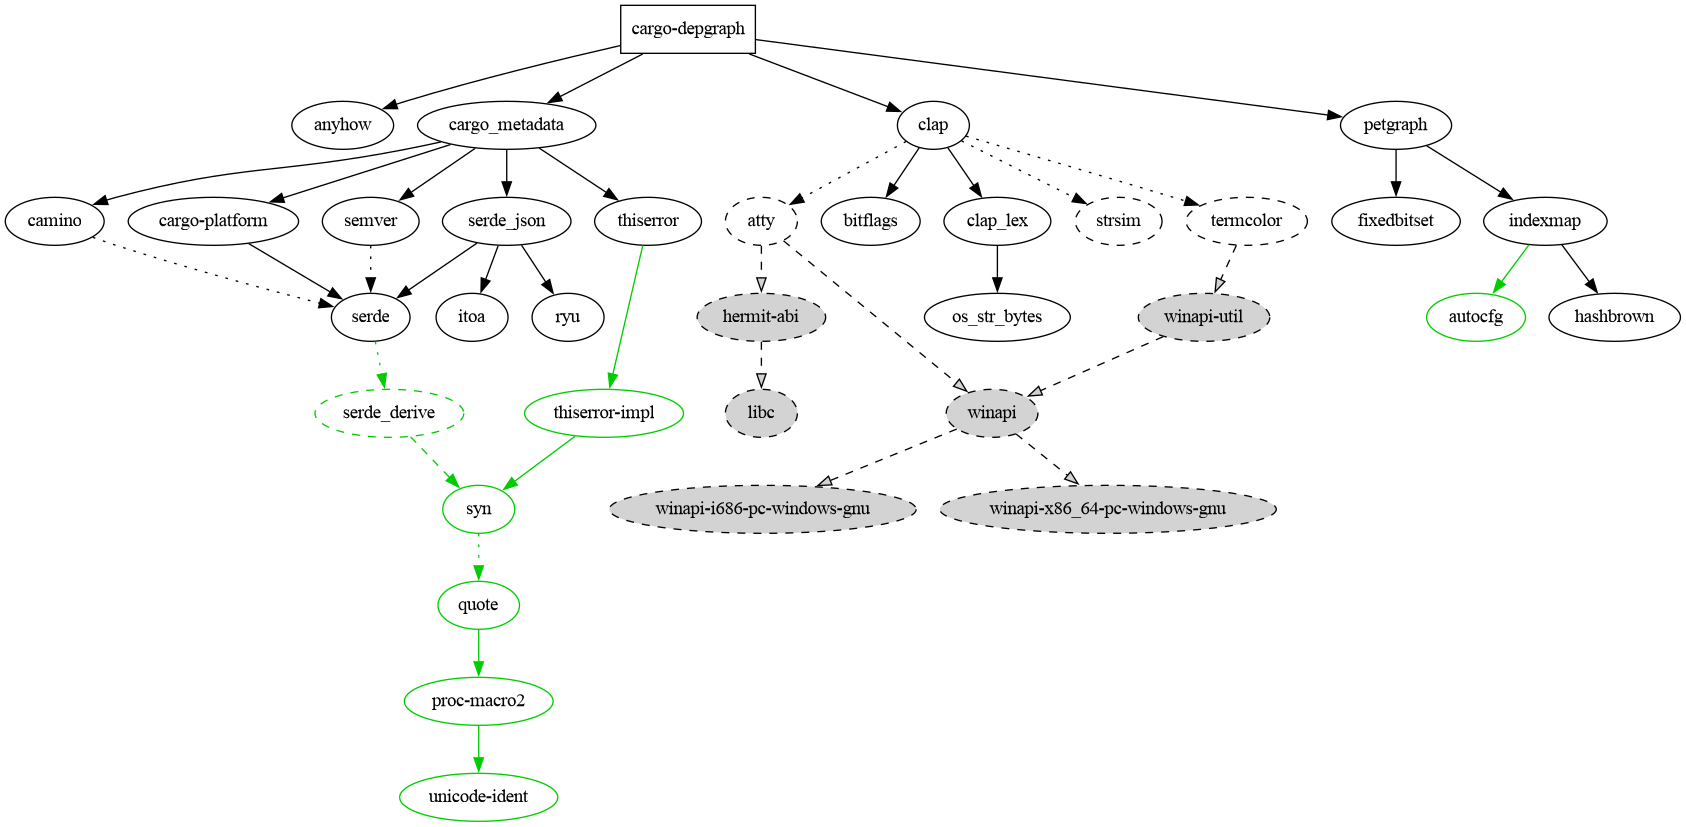 cargo-depgraph's dependency graph with transitive dependency edges de-duplicated